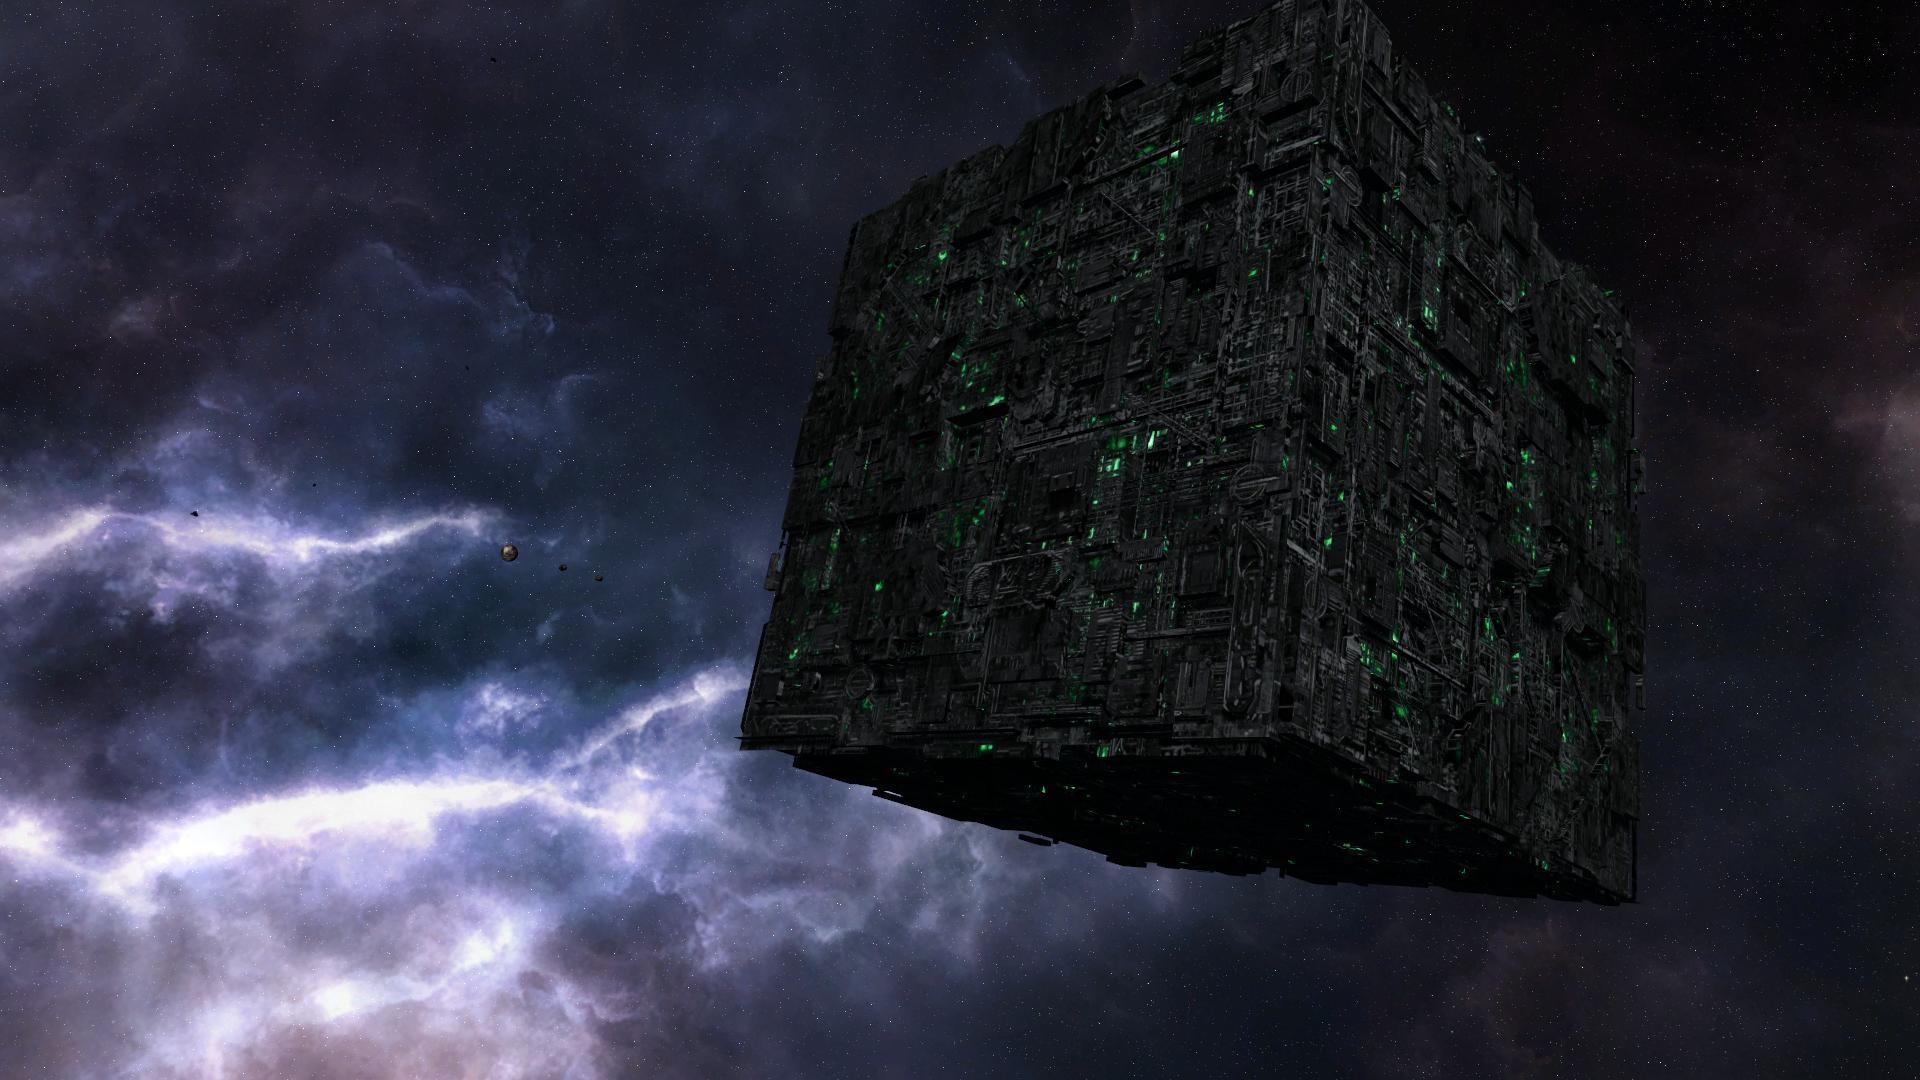 view image. Found on: borg-wallpaper